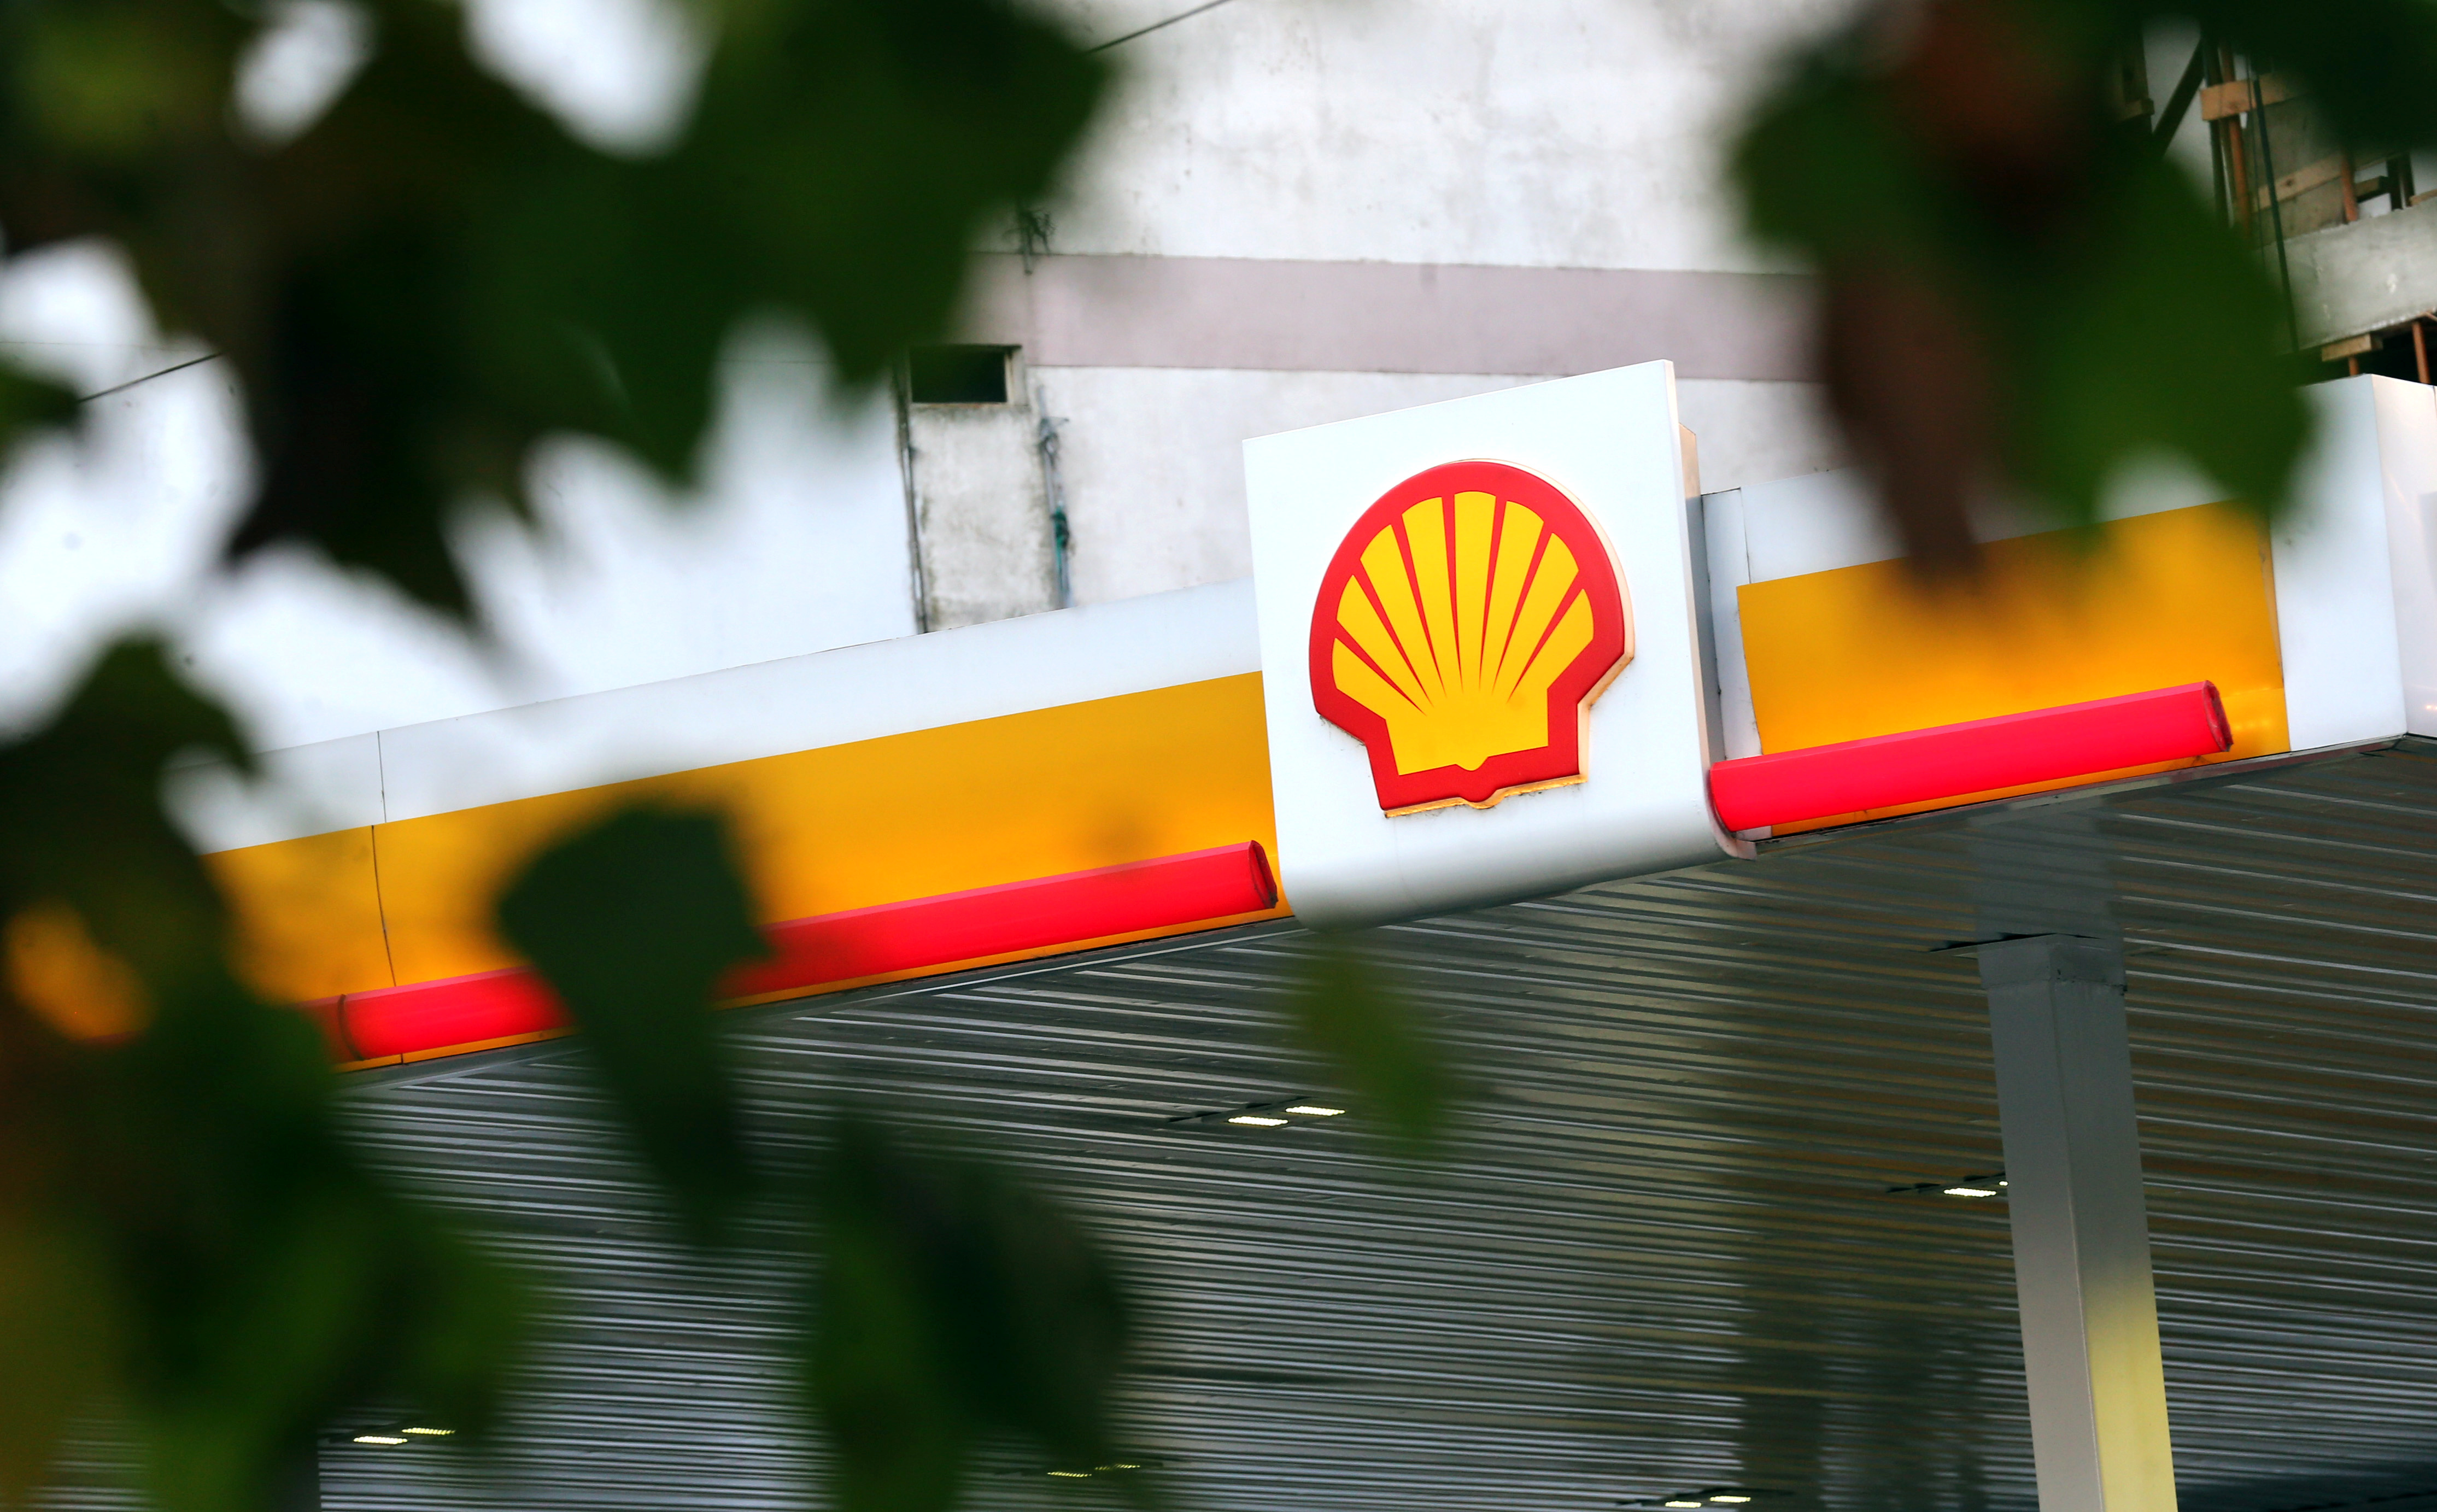 Shell to exit Russia after Ukraine invasion, joining BP | Reuters